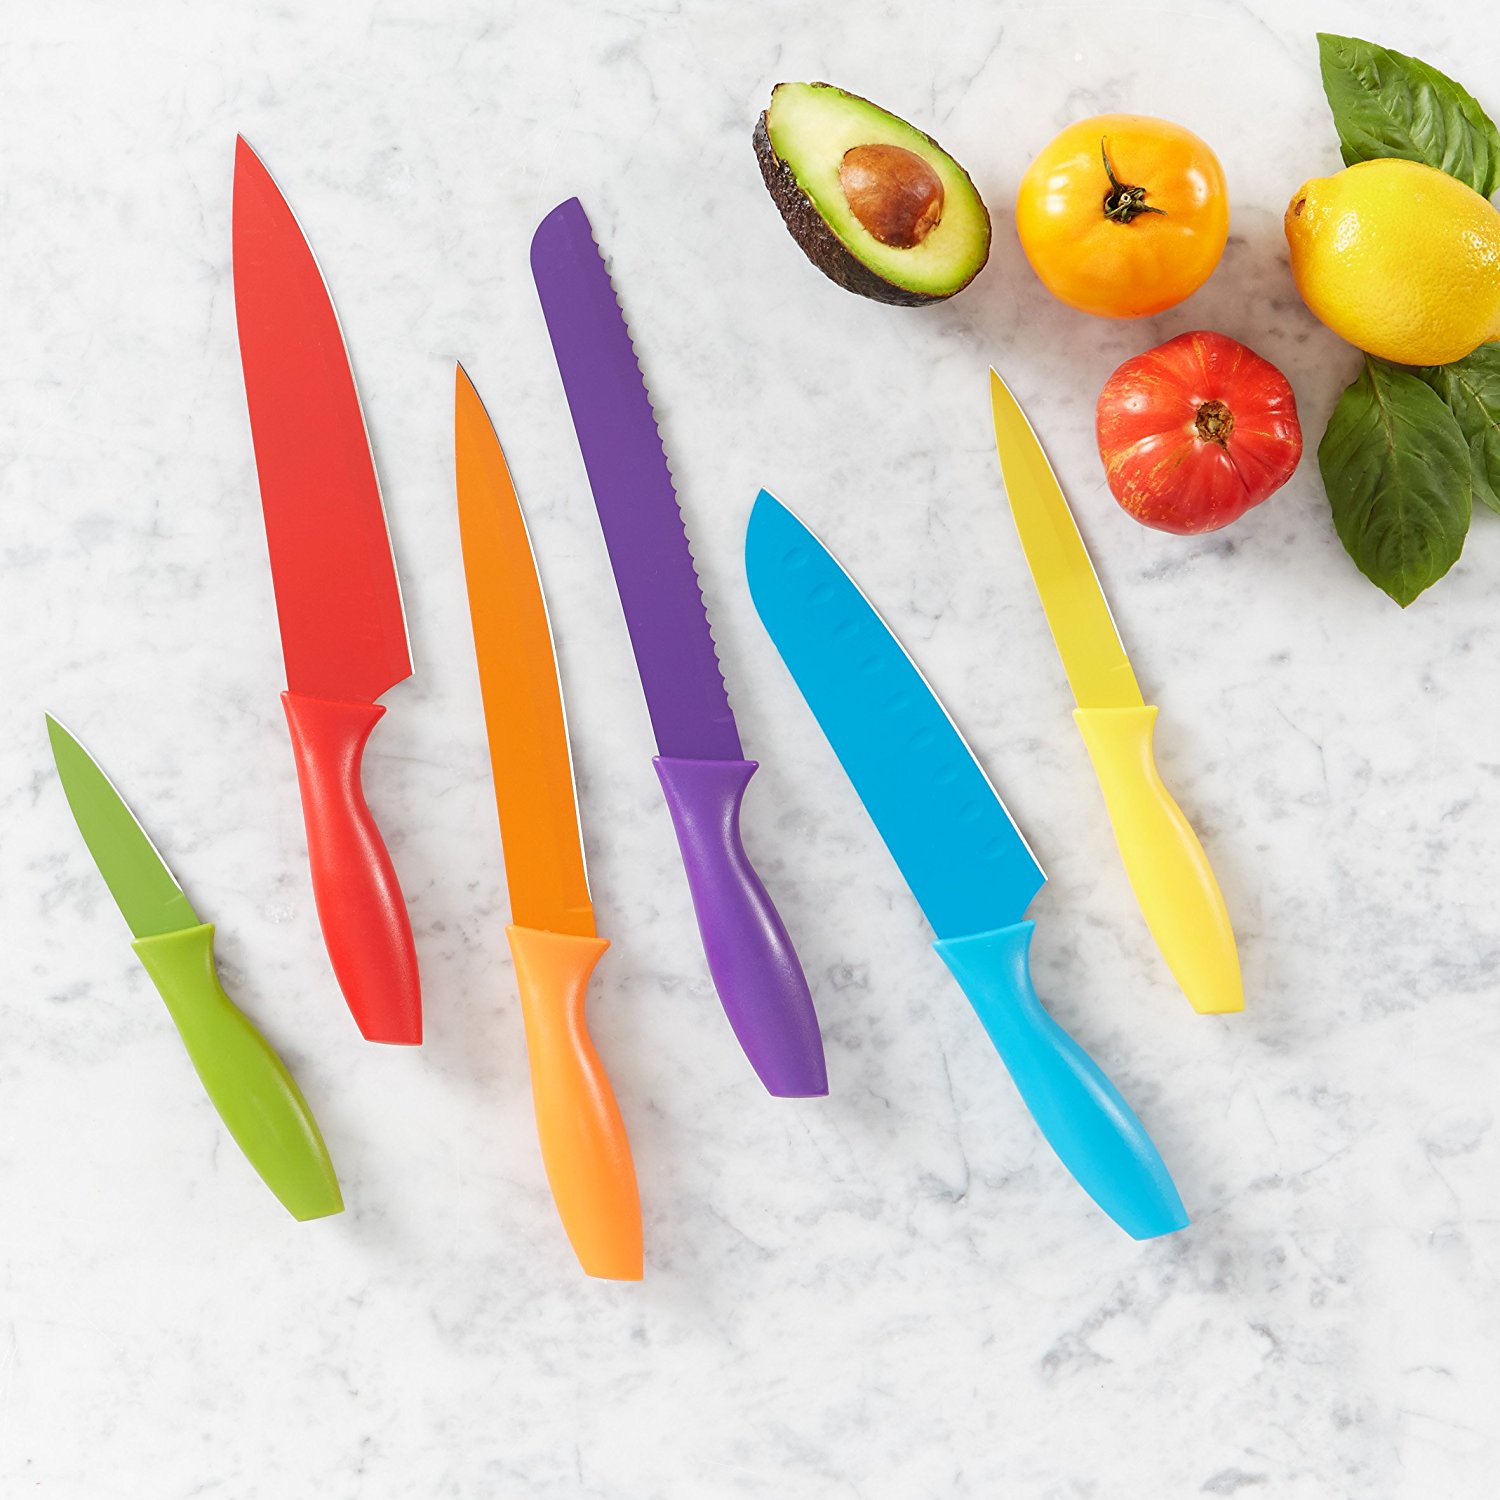 Prime members: AmazonBasics 12-piece colored knife set for $16